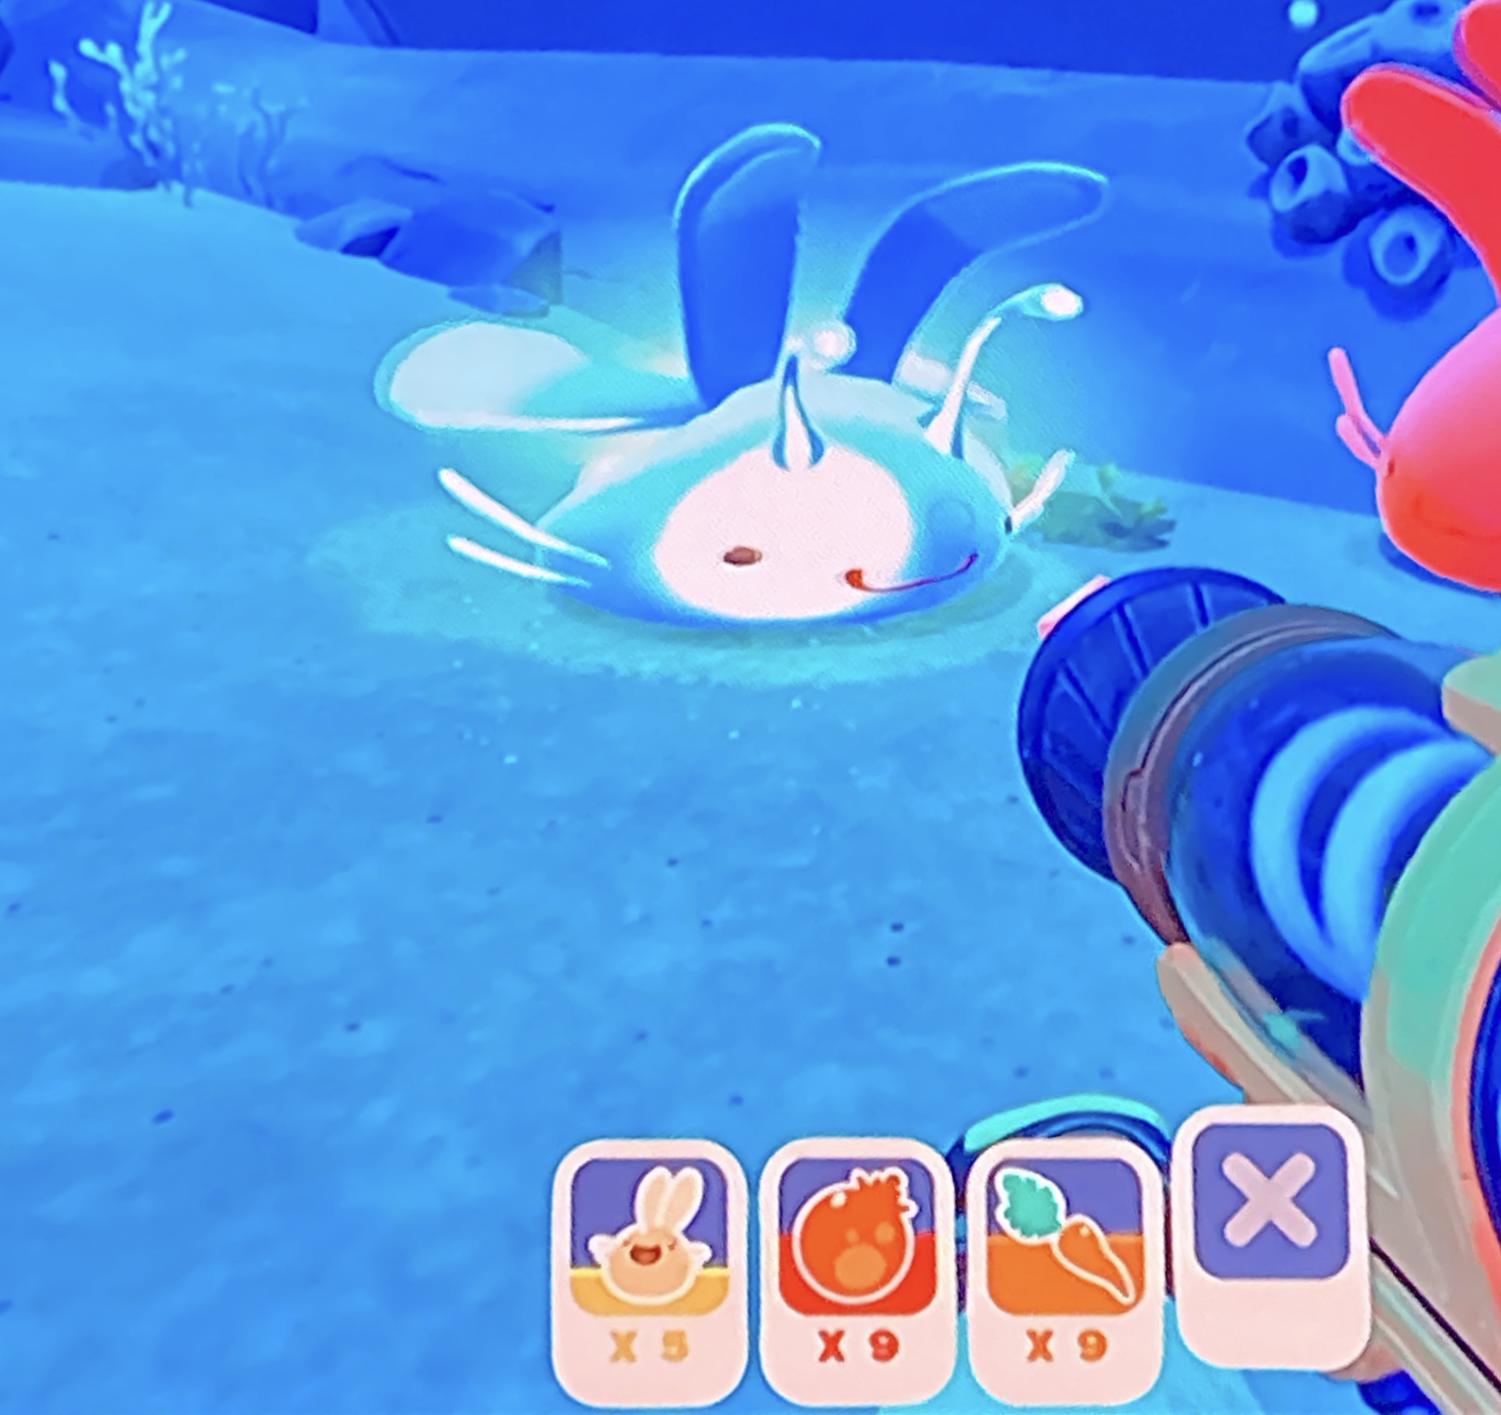 Video Game Review: Slime Rancher 2 – The Coyote Caller